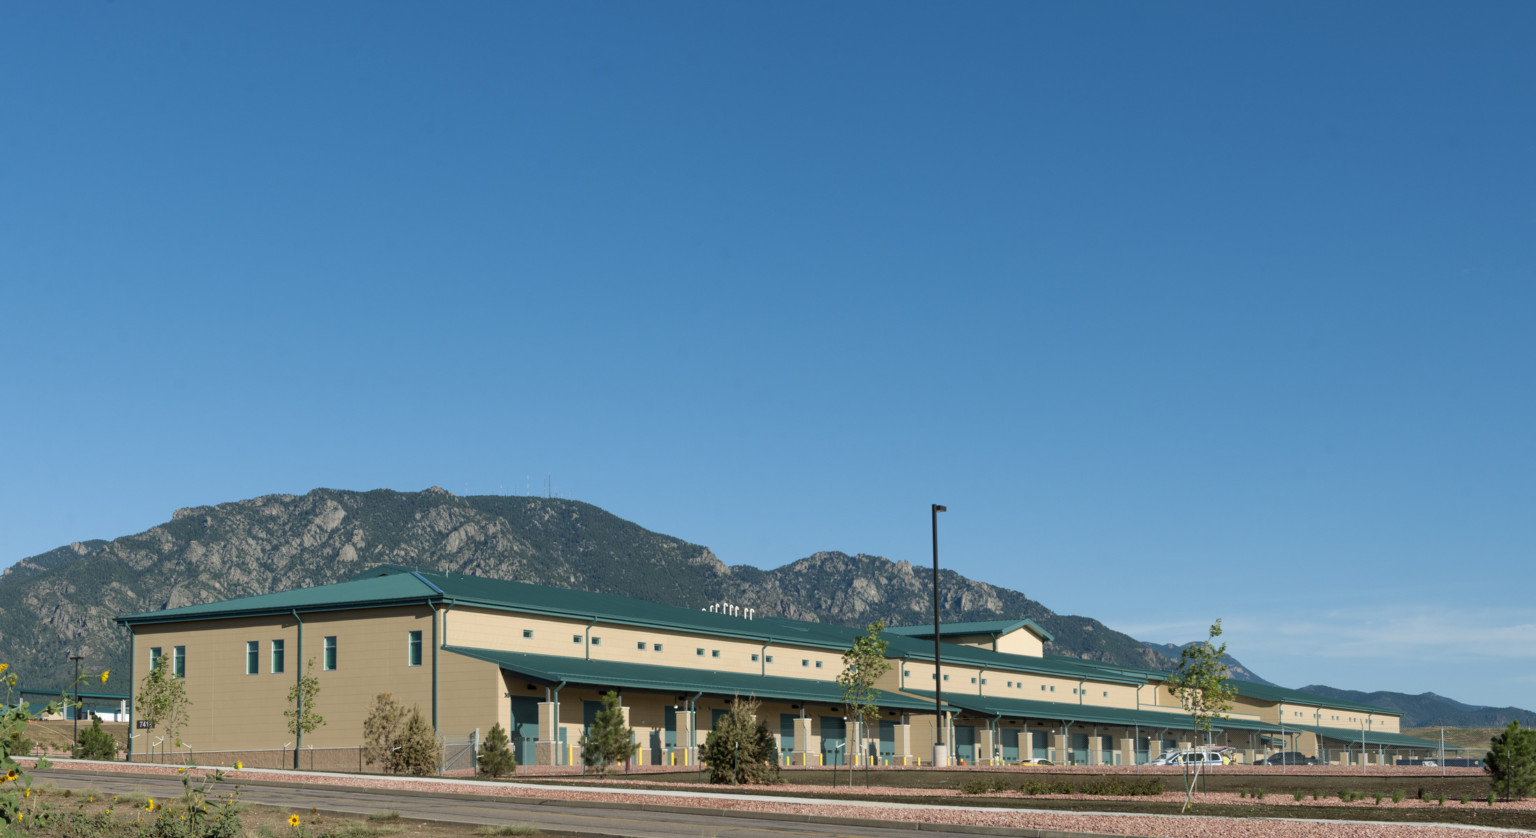 Two story yellow CMU building with green metal roof and loading docks surrounded by secure fence. Mountains in background